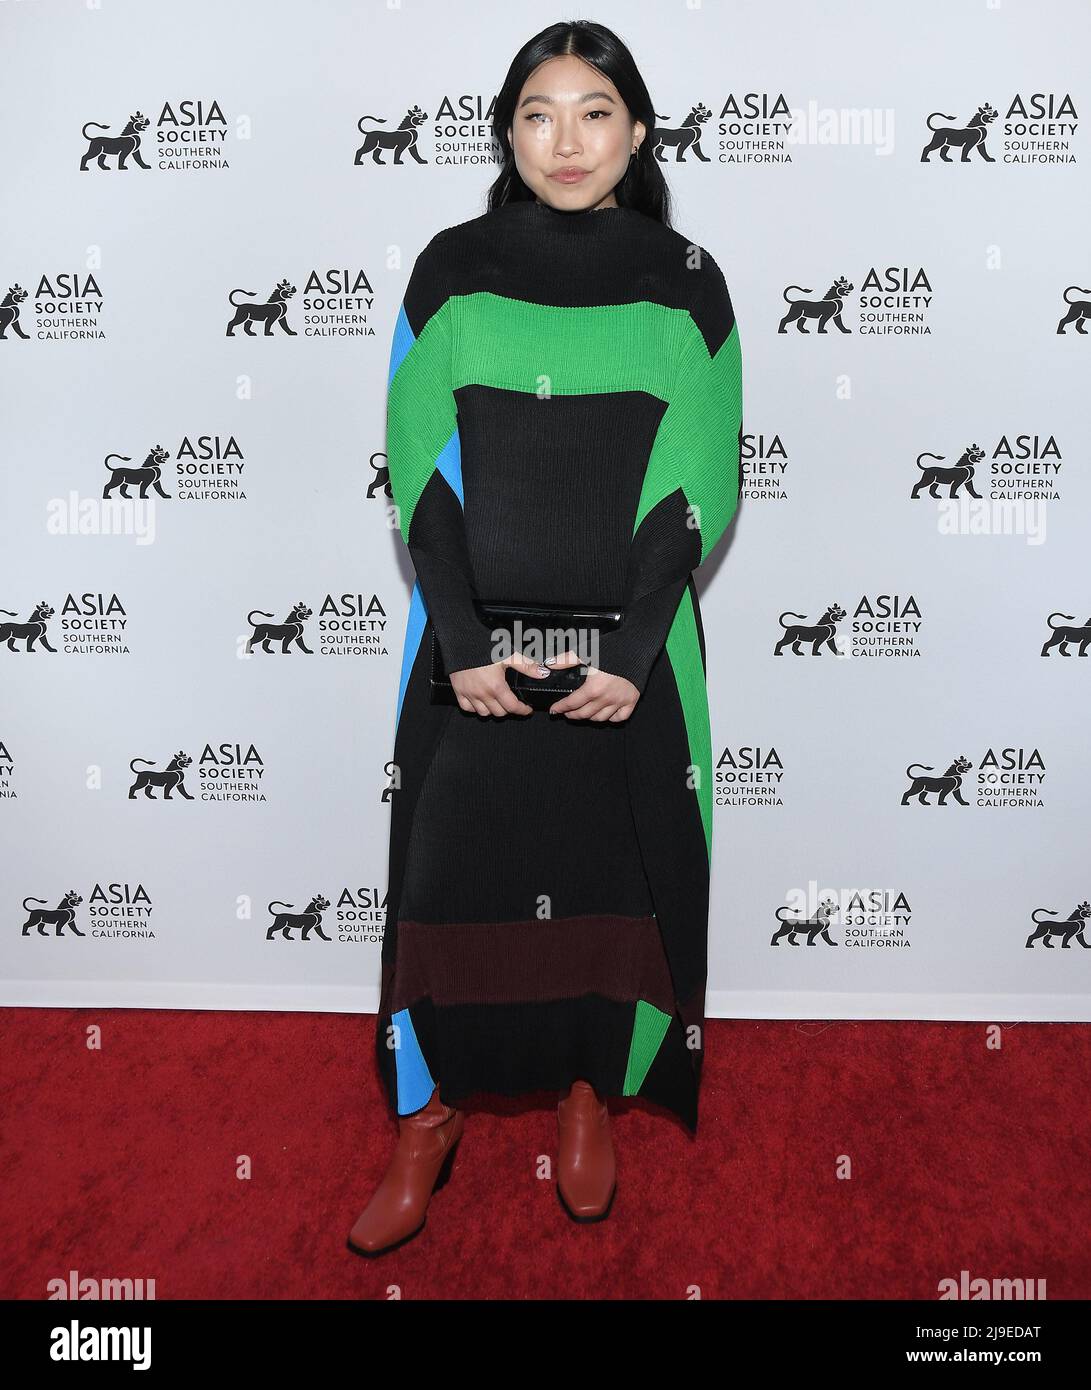 Awkwafina at the Asia Society Southern California's 2022 Annual Gala held at the Skirball Cultural Center in Los Angeles, CA on Sunday, ?May 22, 2022. (Photo By Sthanlee B. Mirador/Gold House/Sipa USA) Stock Photo